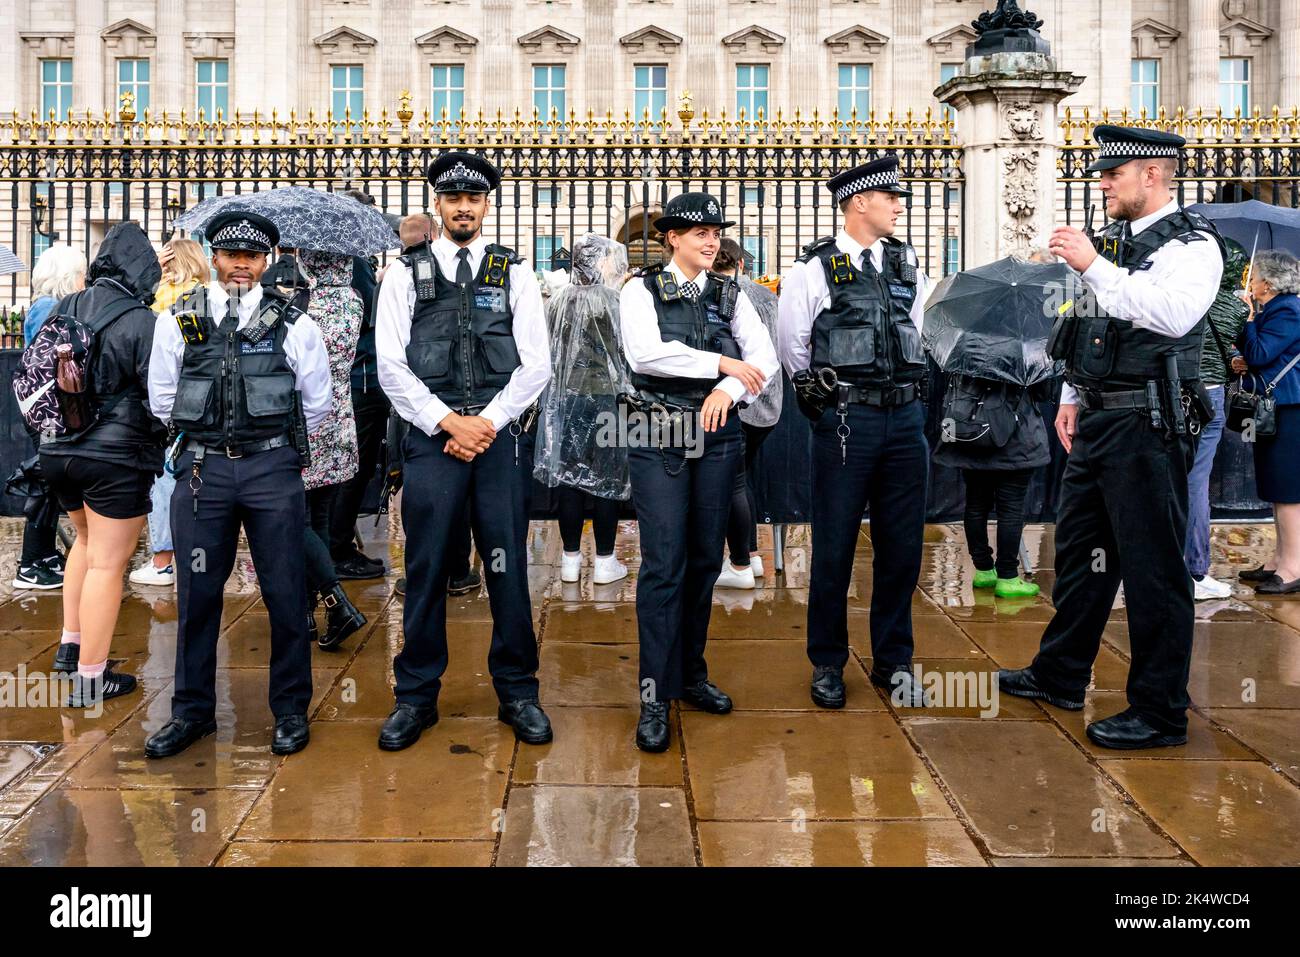 Metropolitan Police Officers Stand Outside Buckingham Palace In The Rain, London, UK. Stock Photo